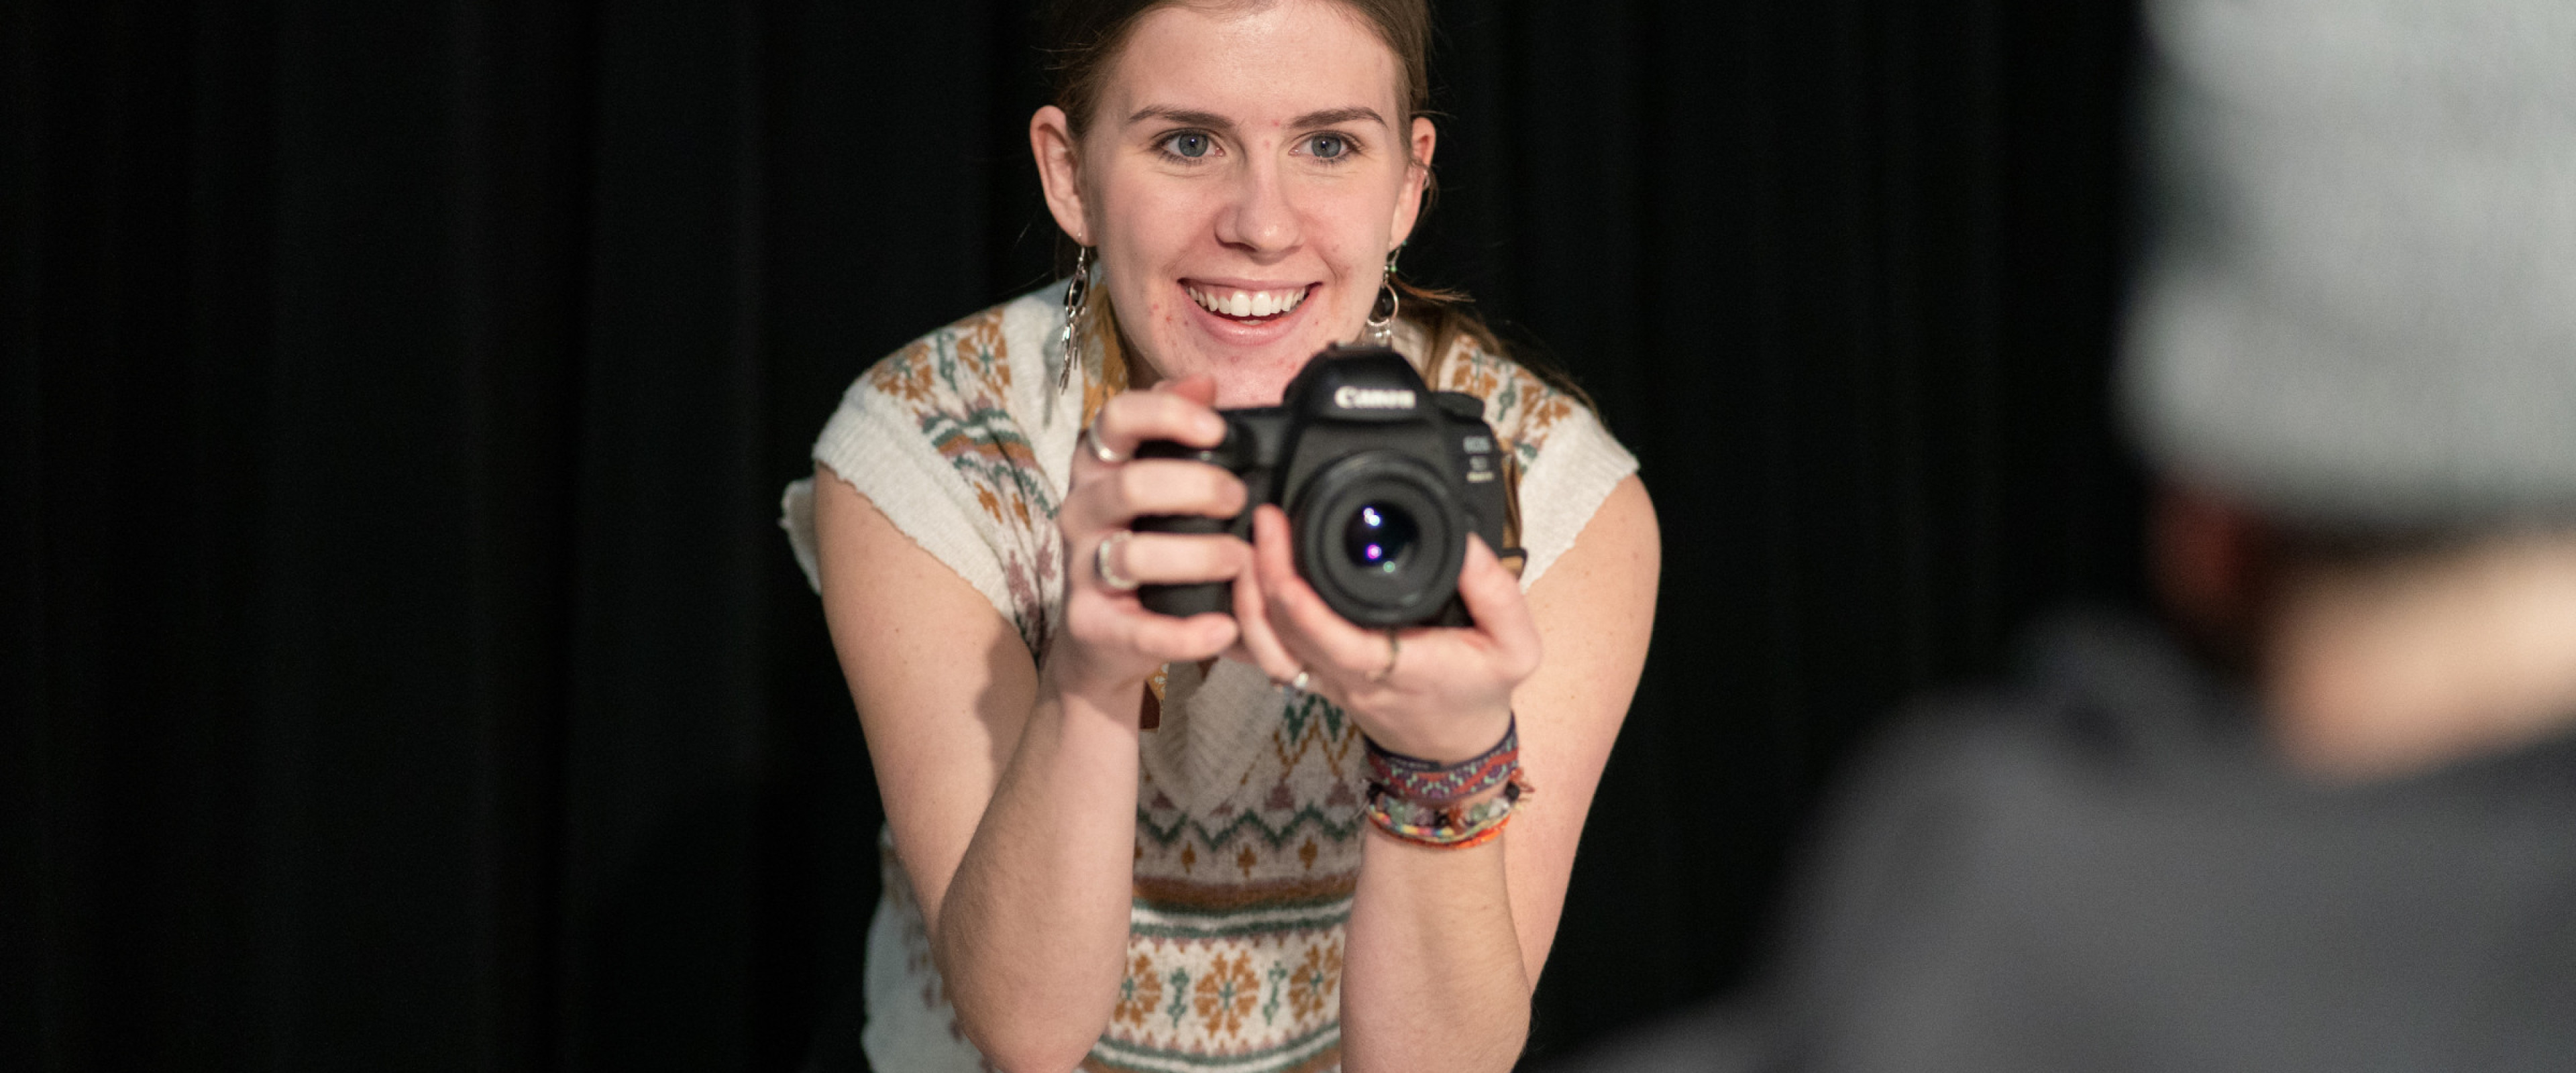 Alli Mitter, photography student, holding a camera in a lighting studio.